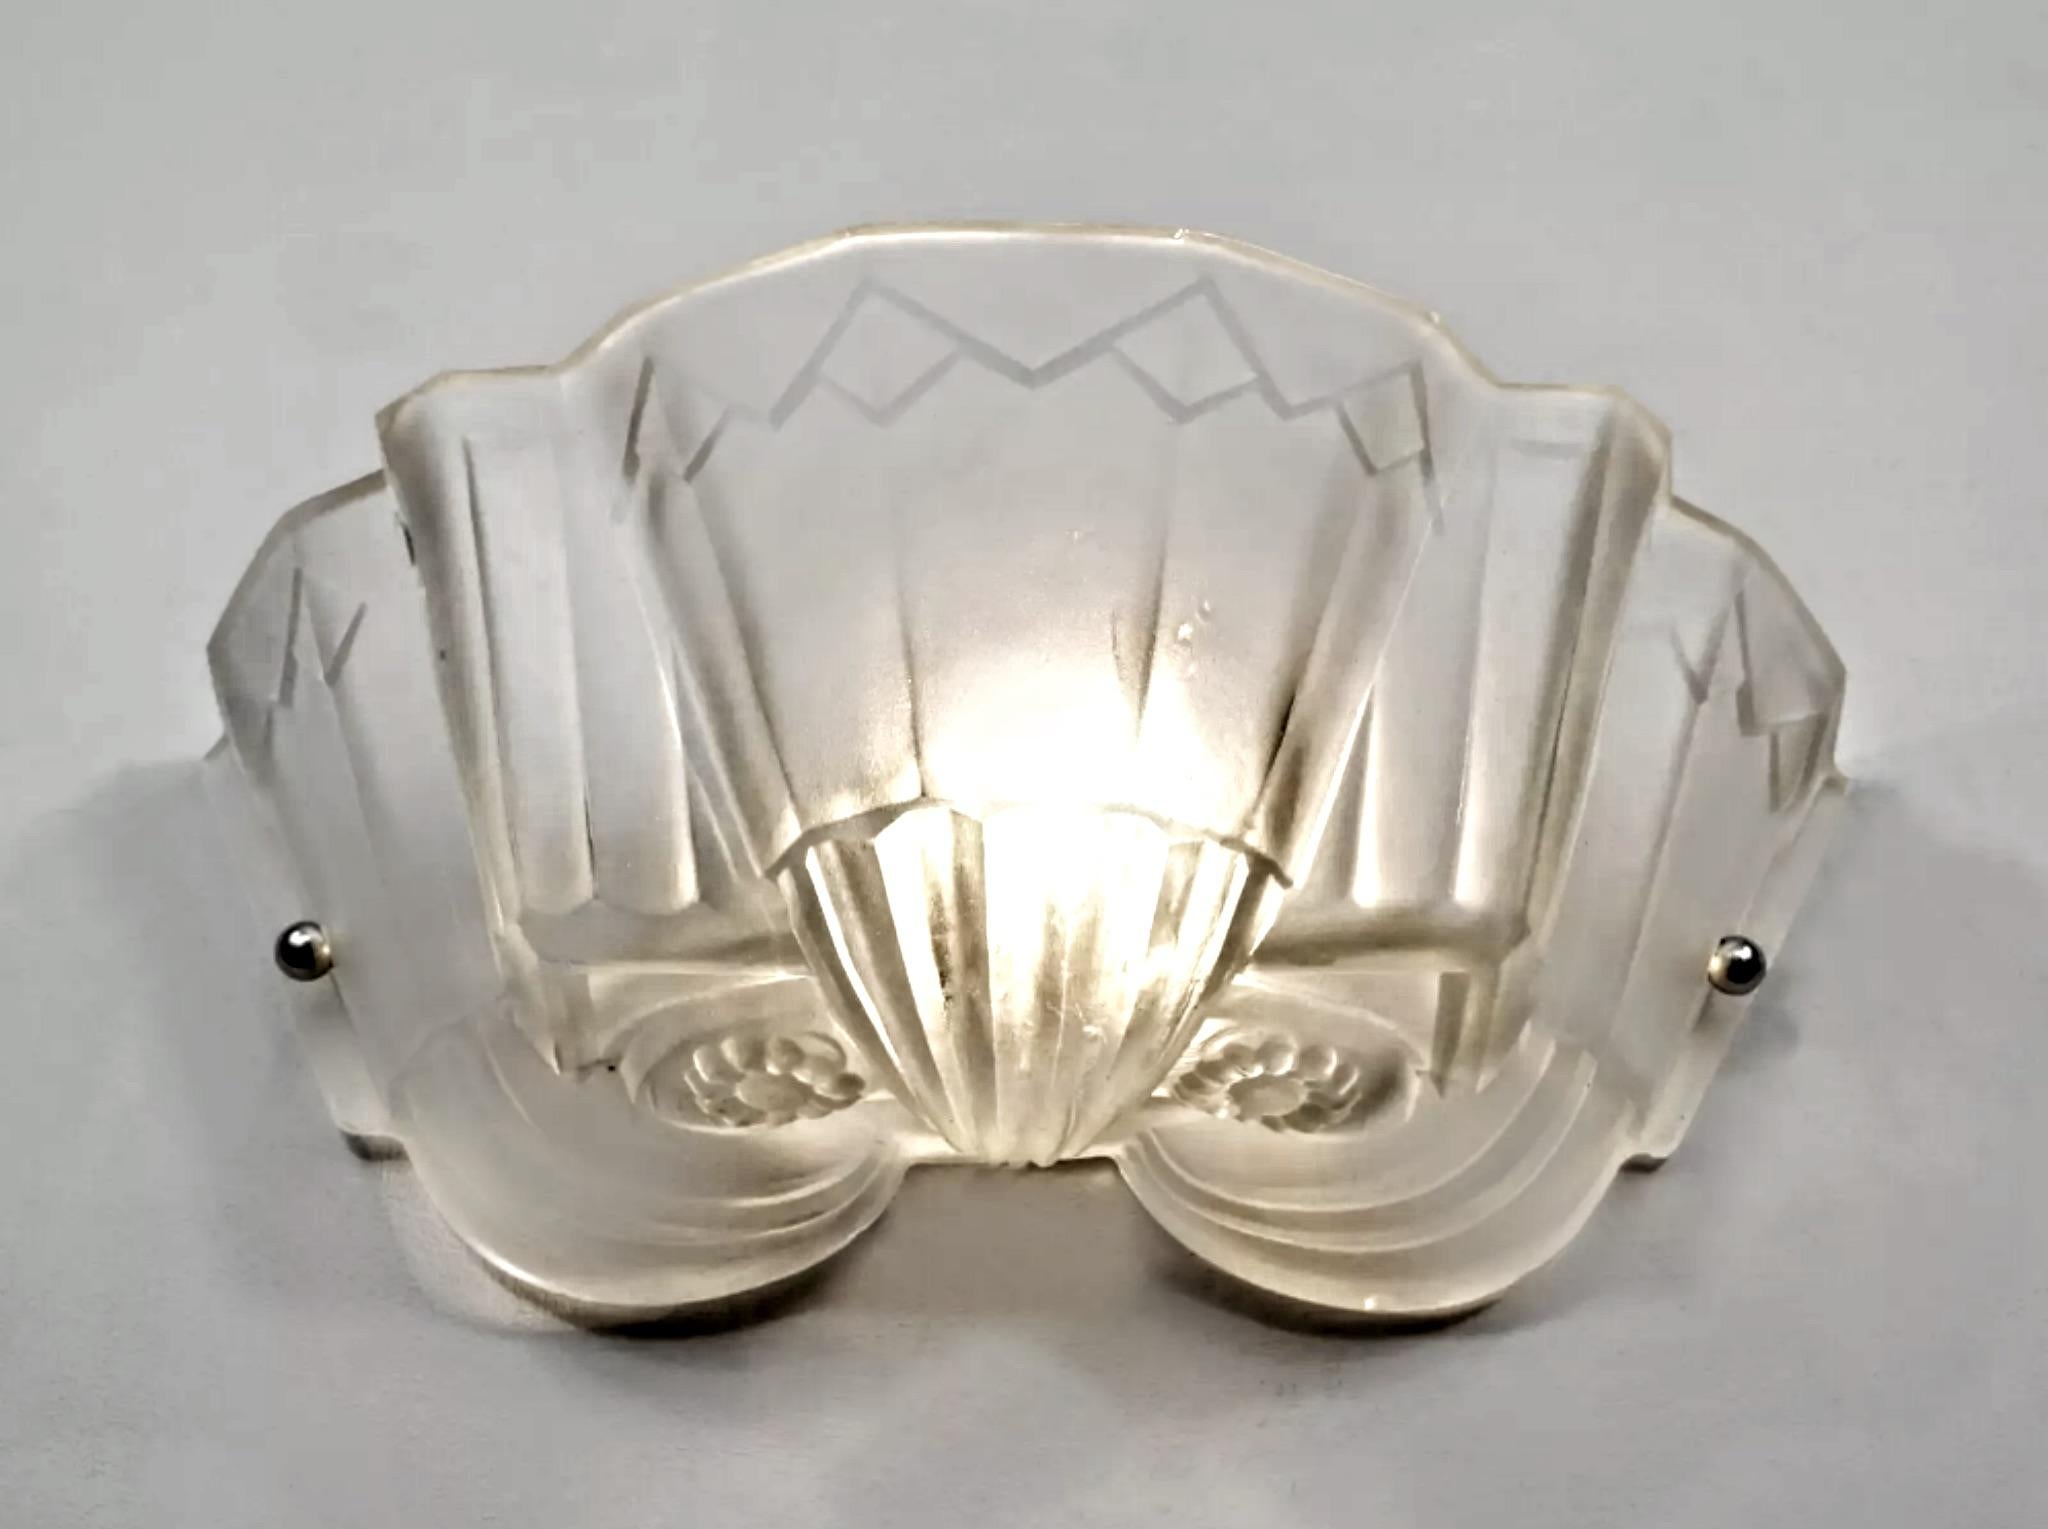 A pair of French Art Deco wall sconces was created by the French artist 